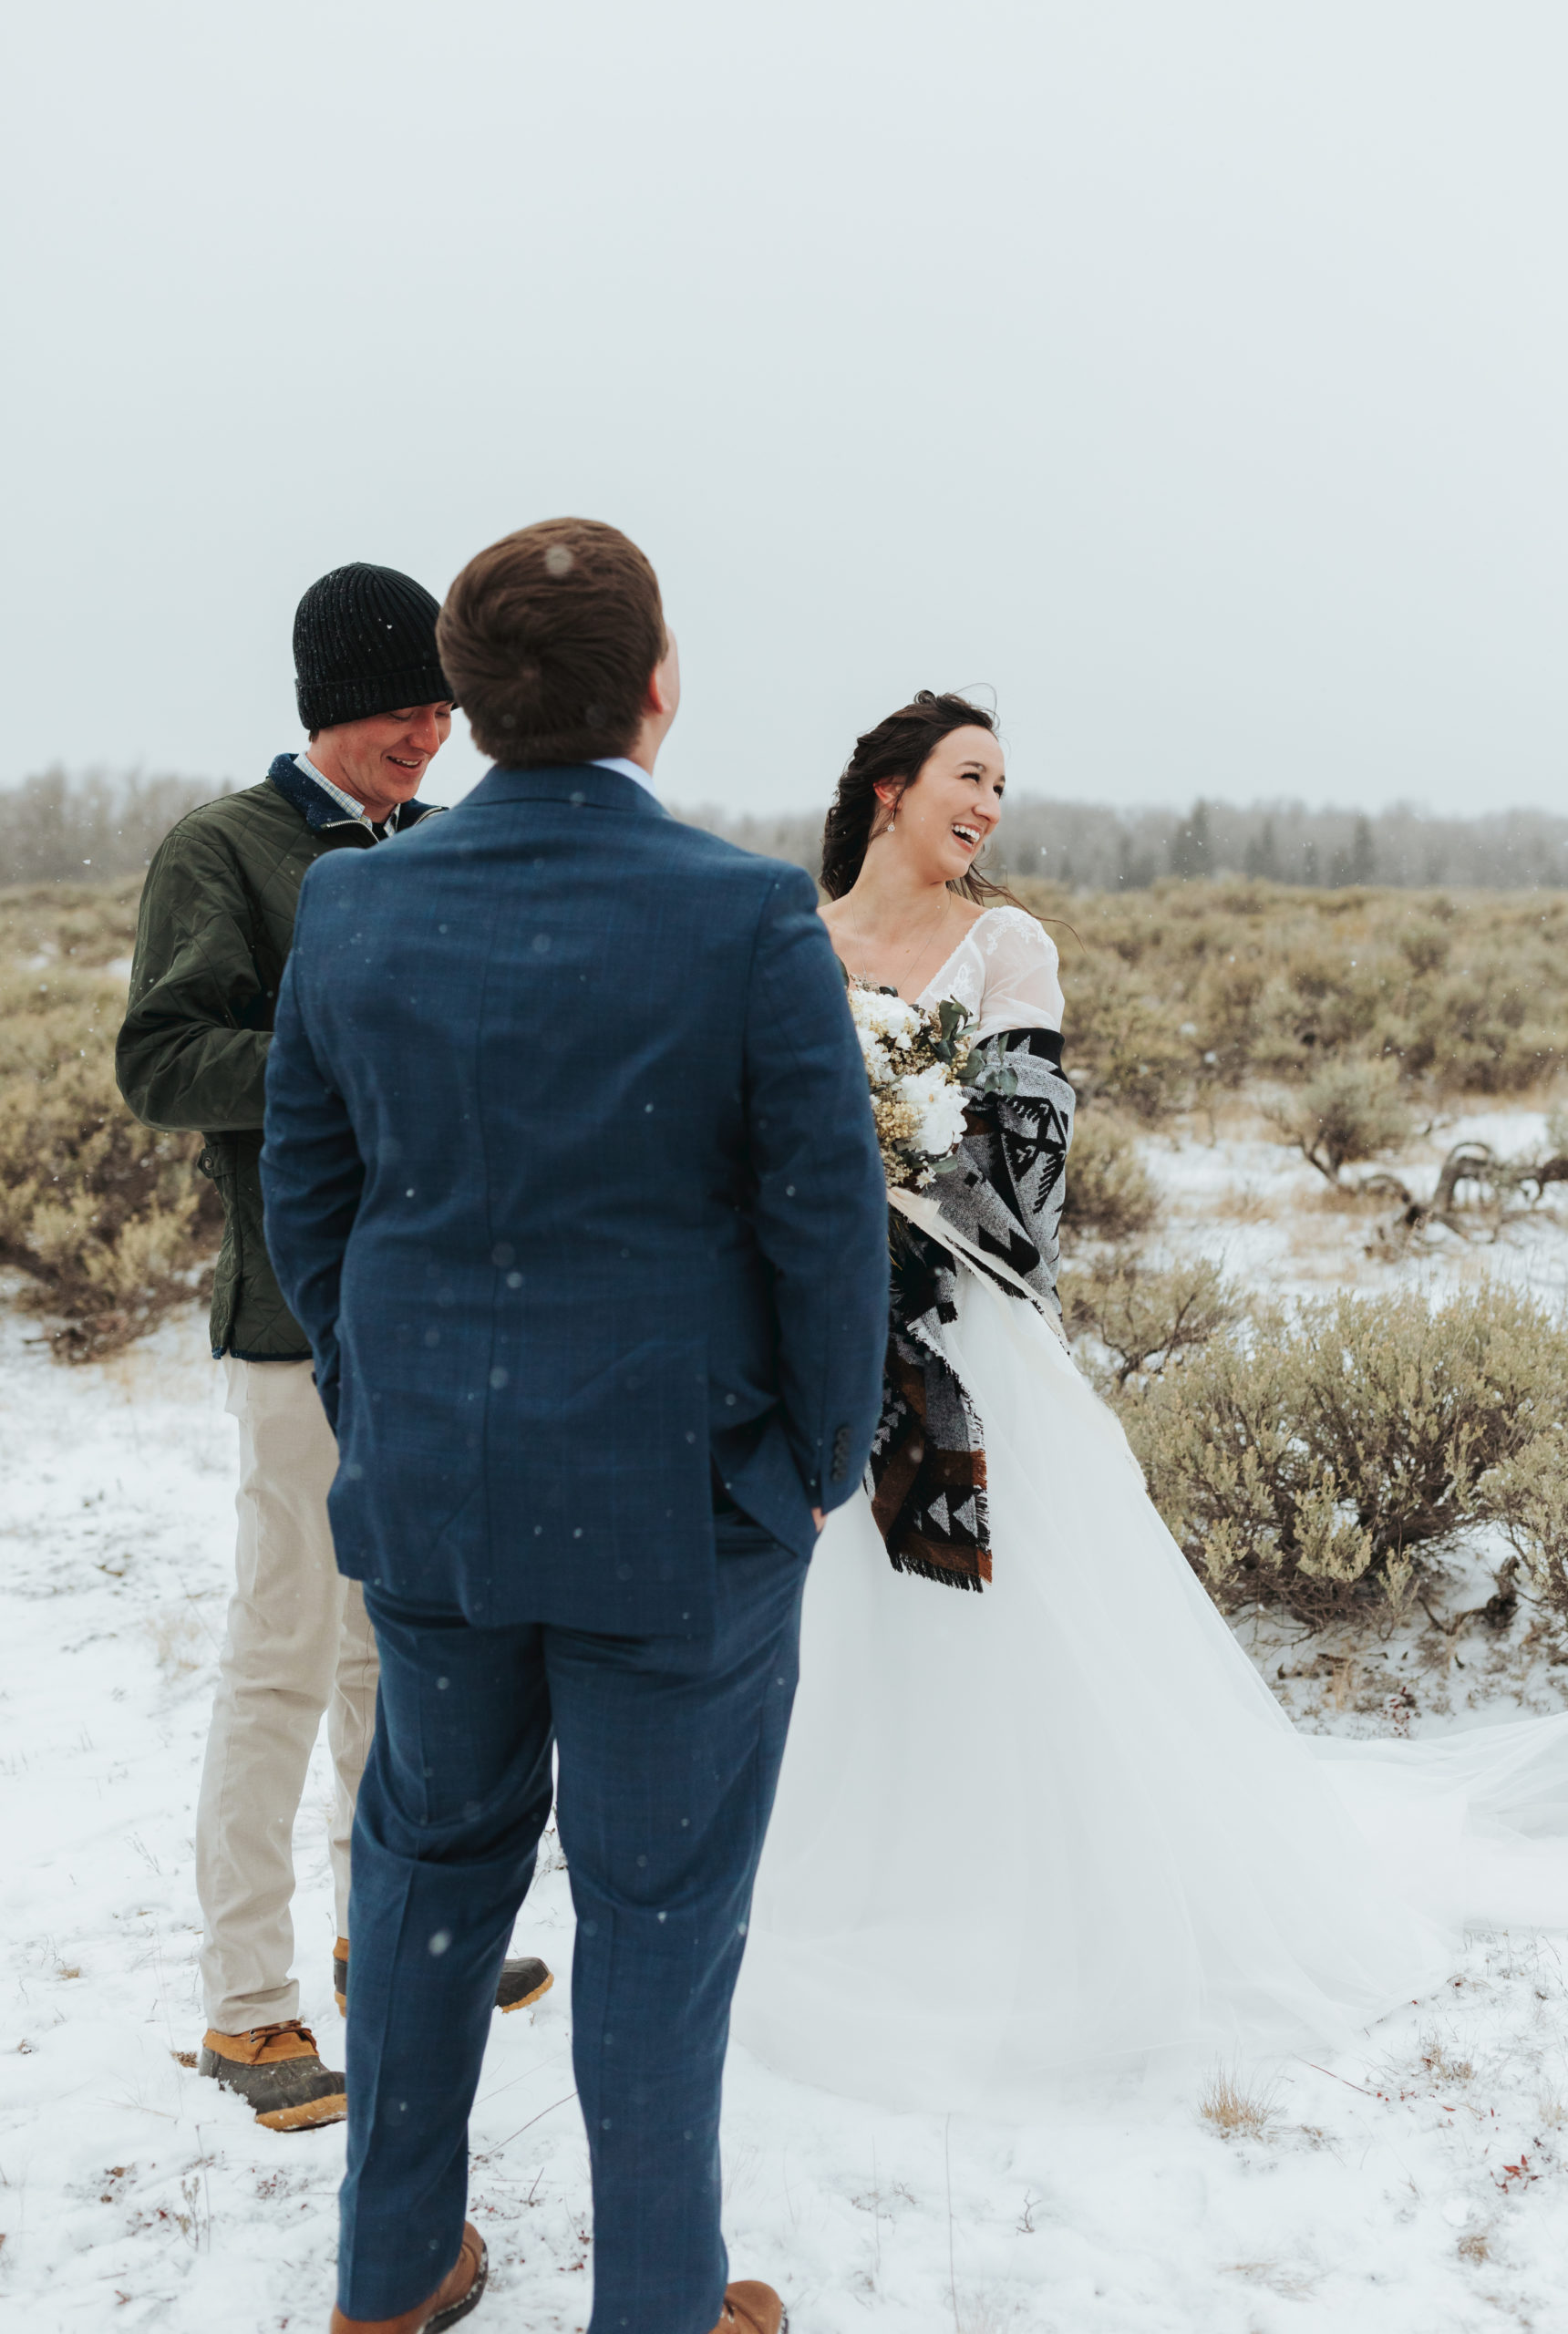 elopement ceremony in snow and mountains n grand teton national park 